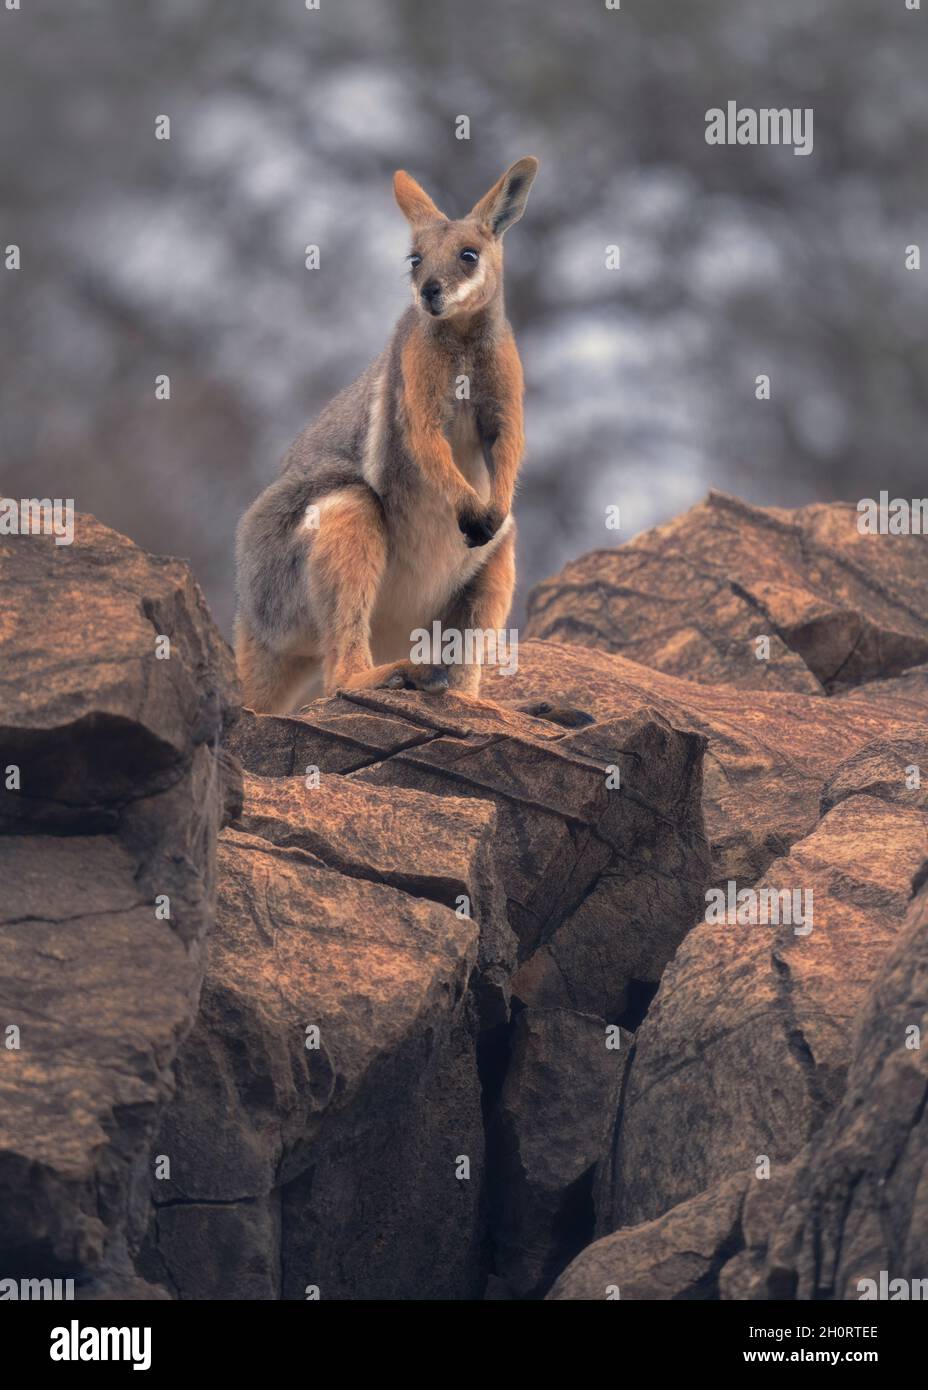 Yellow-footed rock wallaby (Petrogale xanthopus) standing on rocky outcrop, Australia Stock Photo